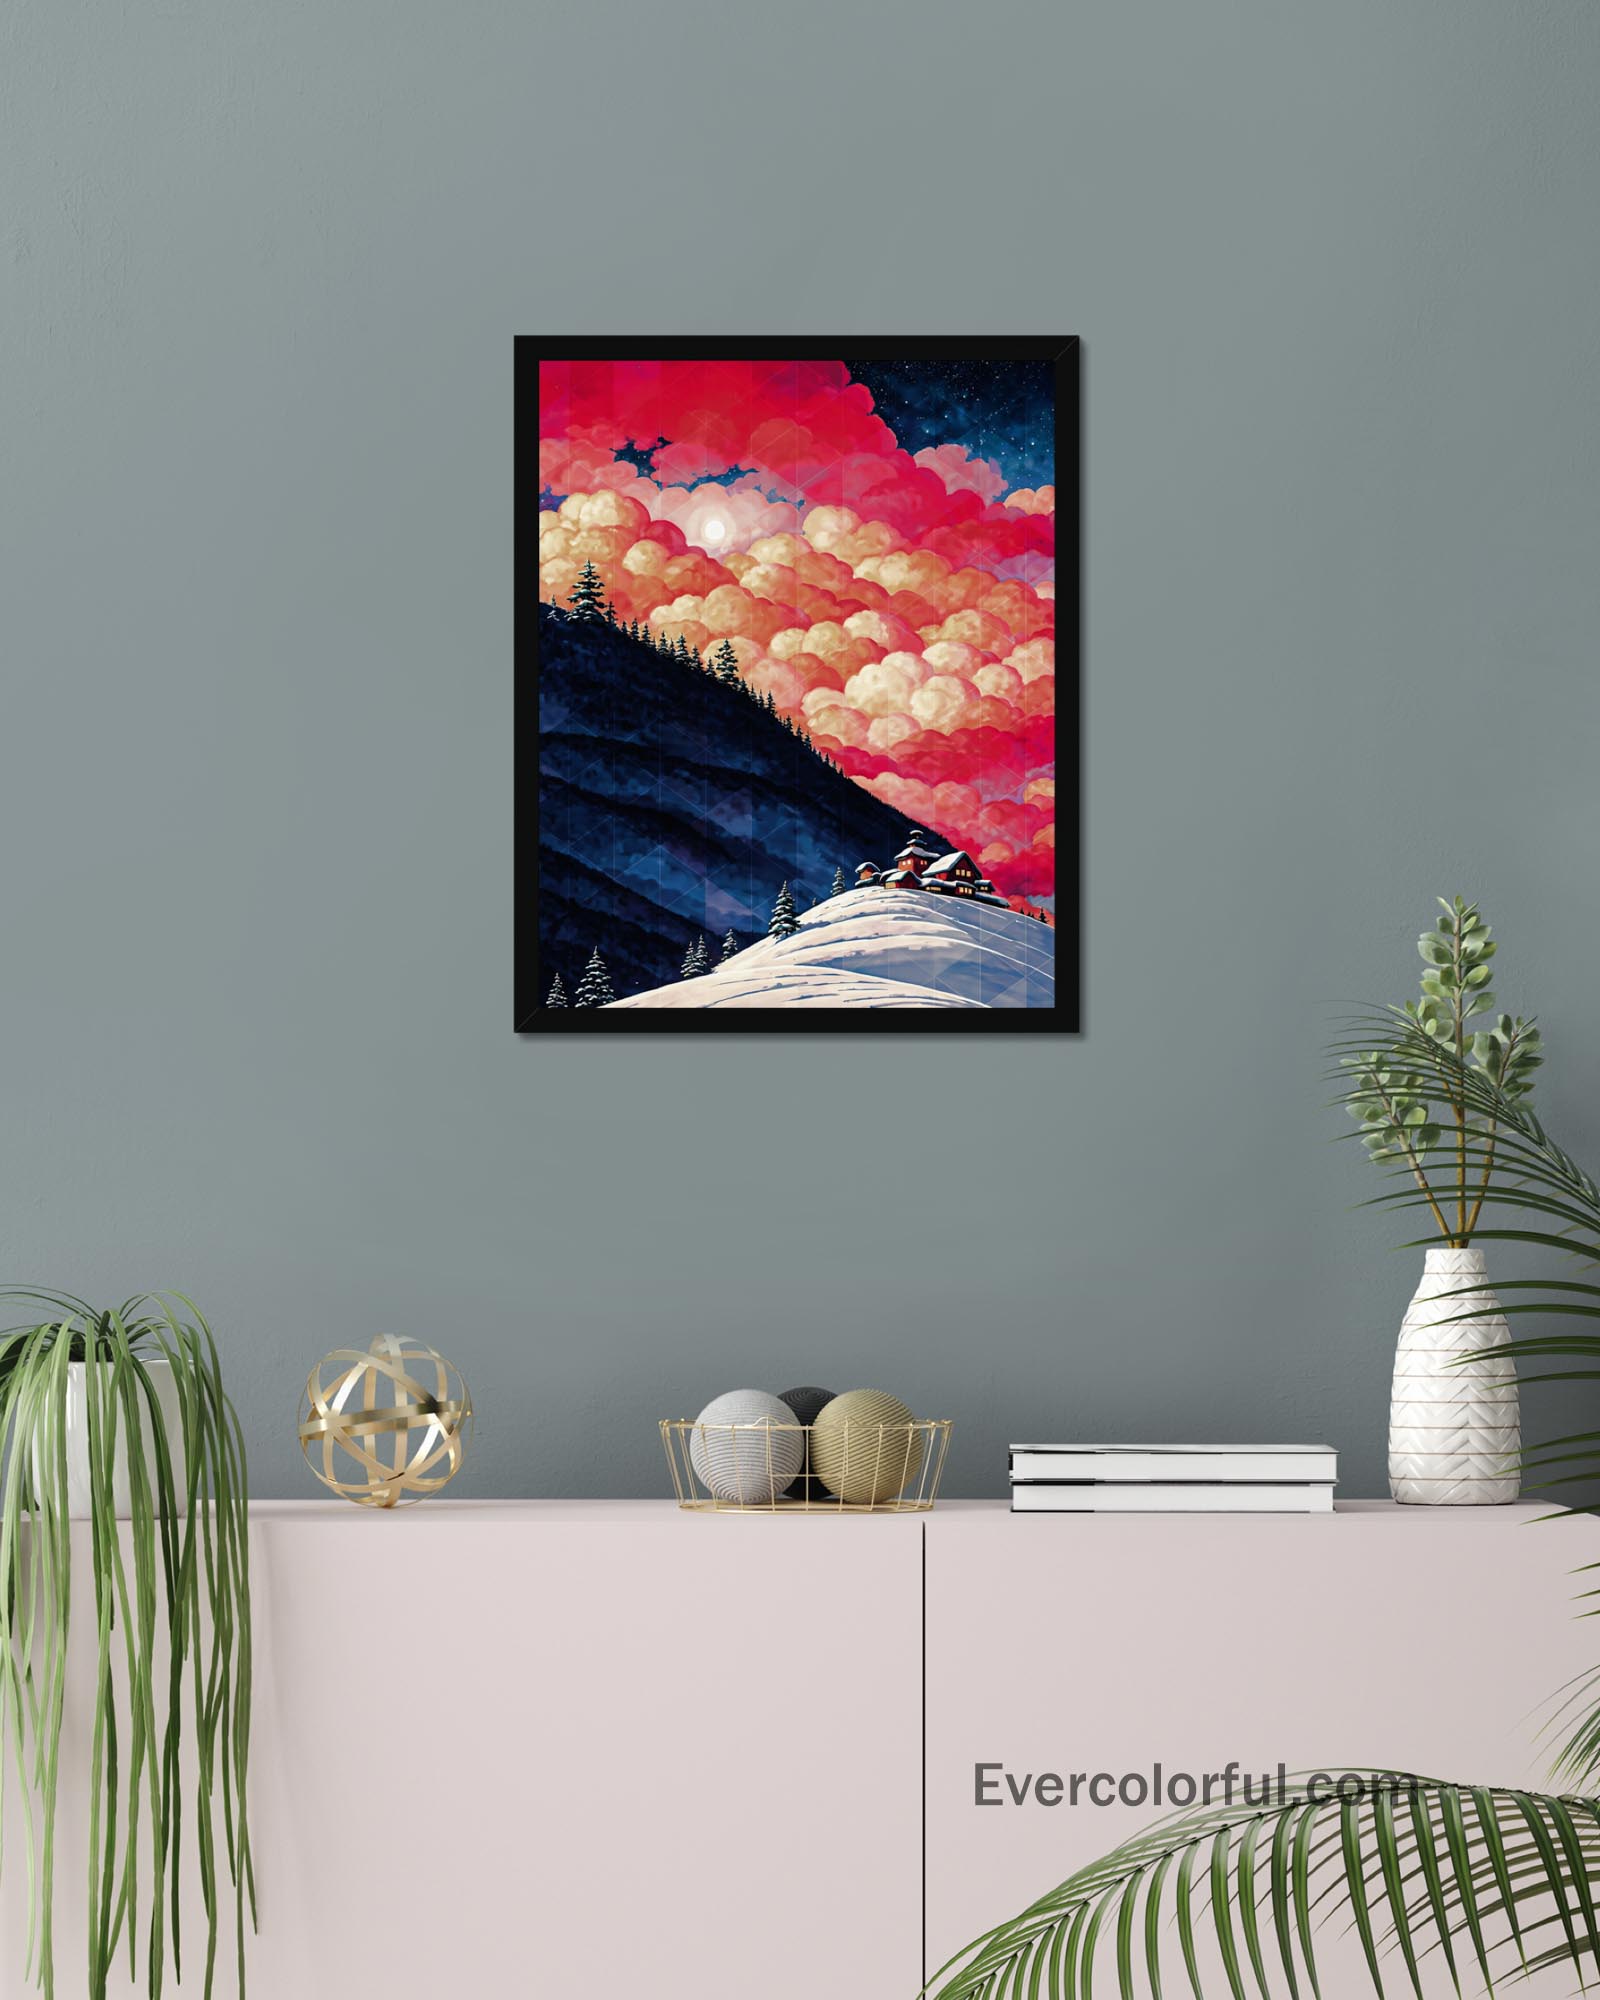 Sunset aflame - Poster - Ever colorful